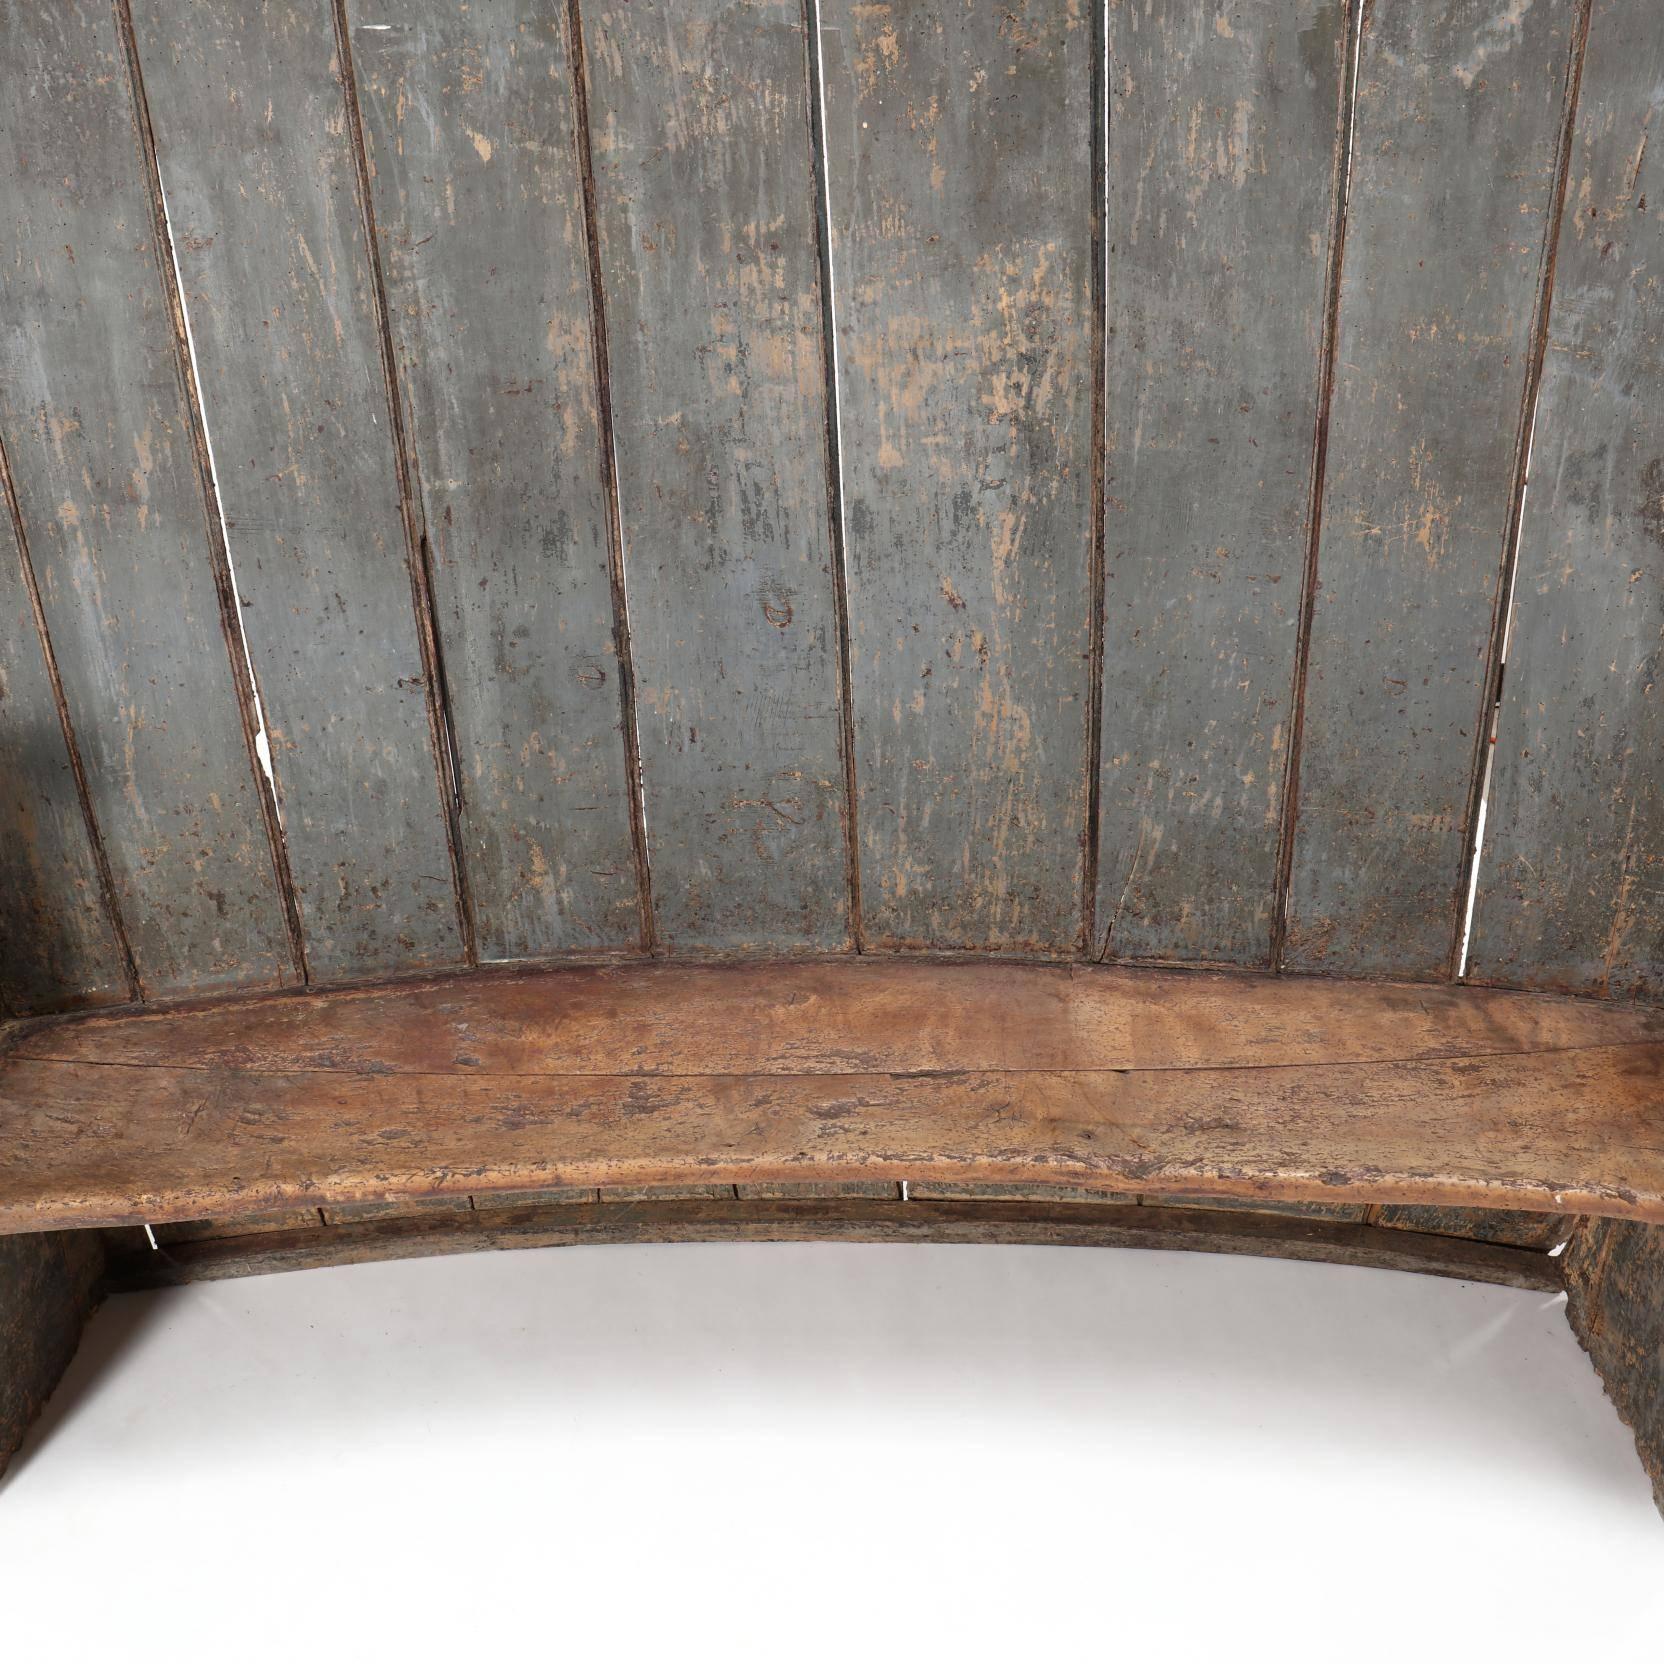 Great 18th century old blue-grey painted wood settle with high concave back and seat, shaped arms with beautiful patina, probably was originally in an old 18th century English pub or inn.